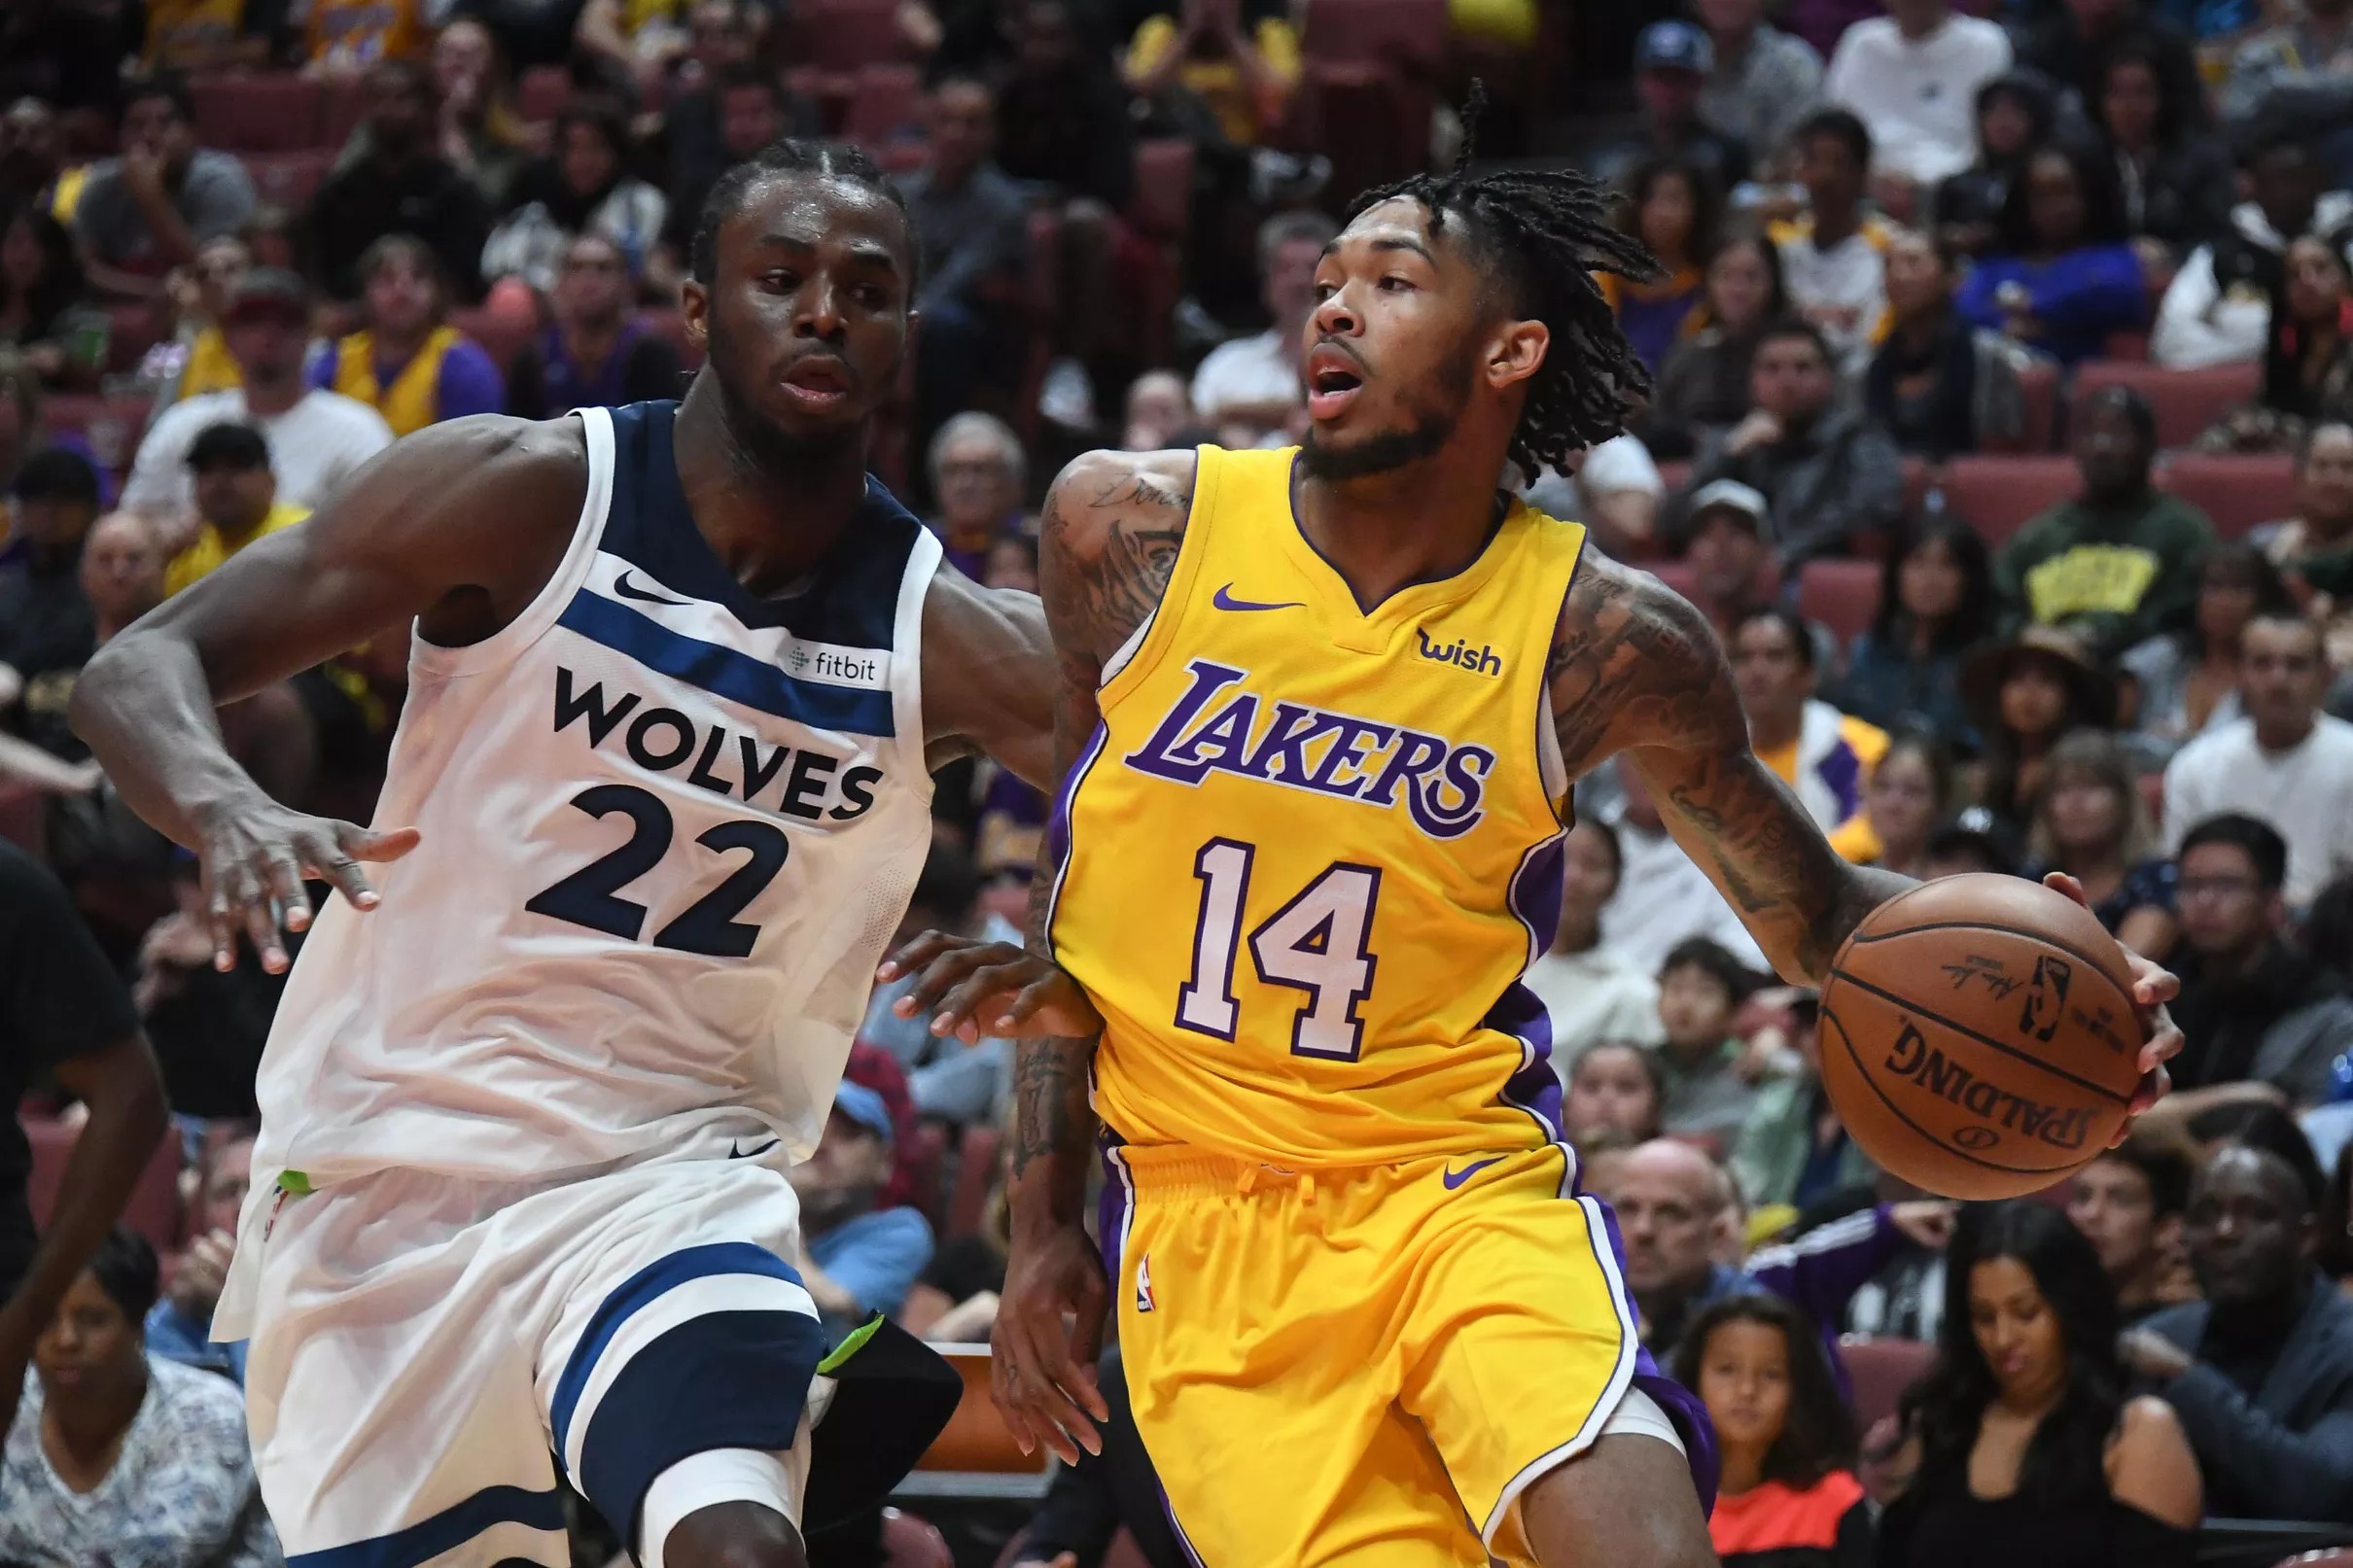 Lakers vs. Timberwolves Game preview and thread, starting time, TV